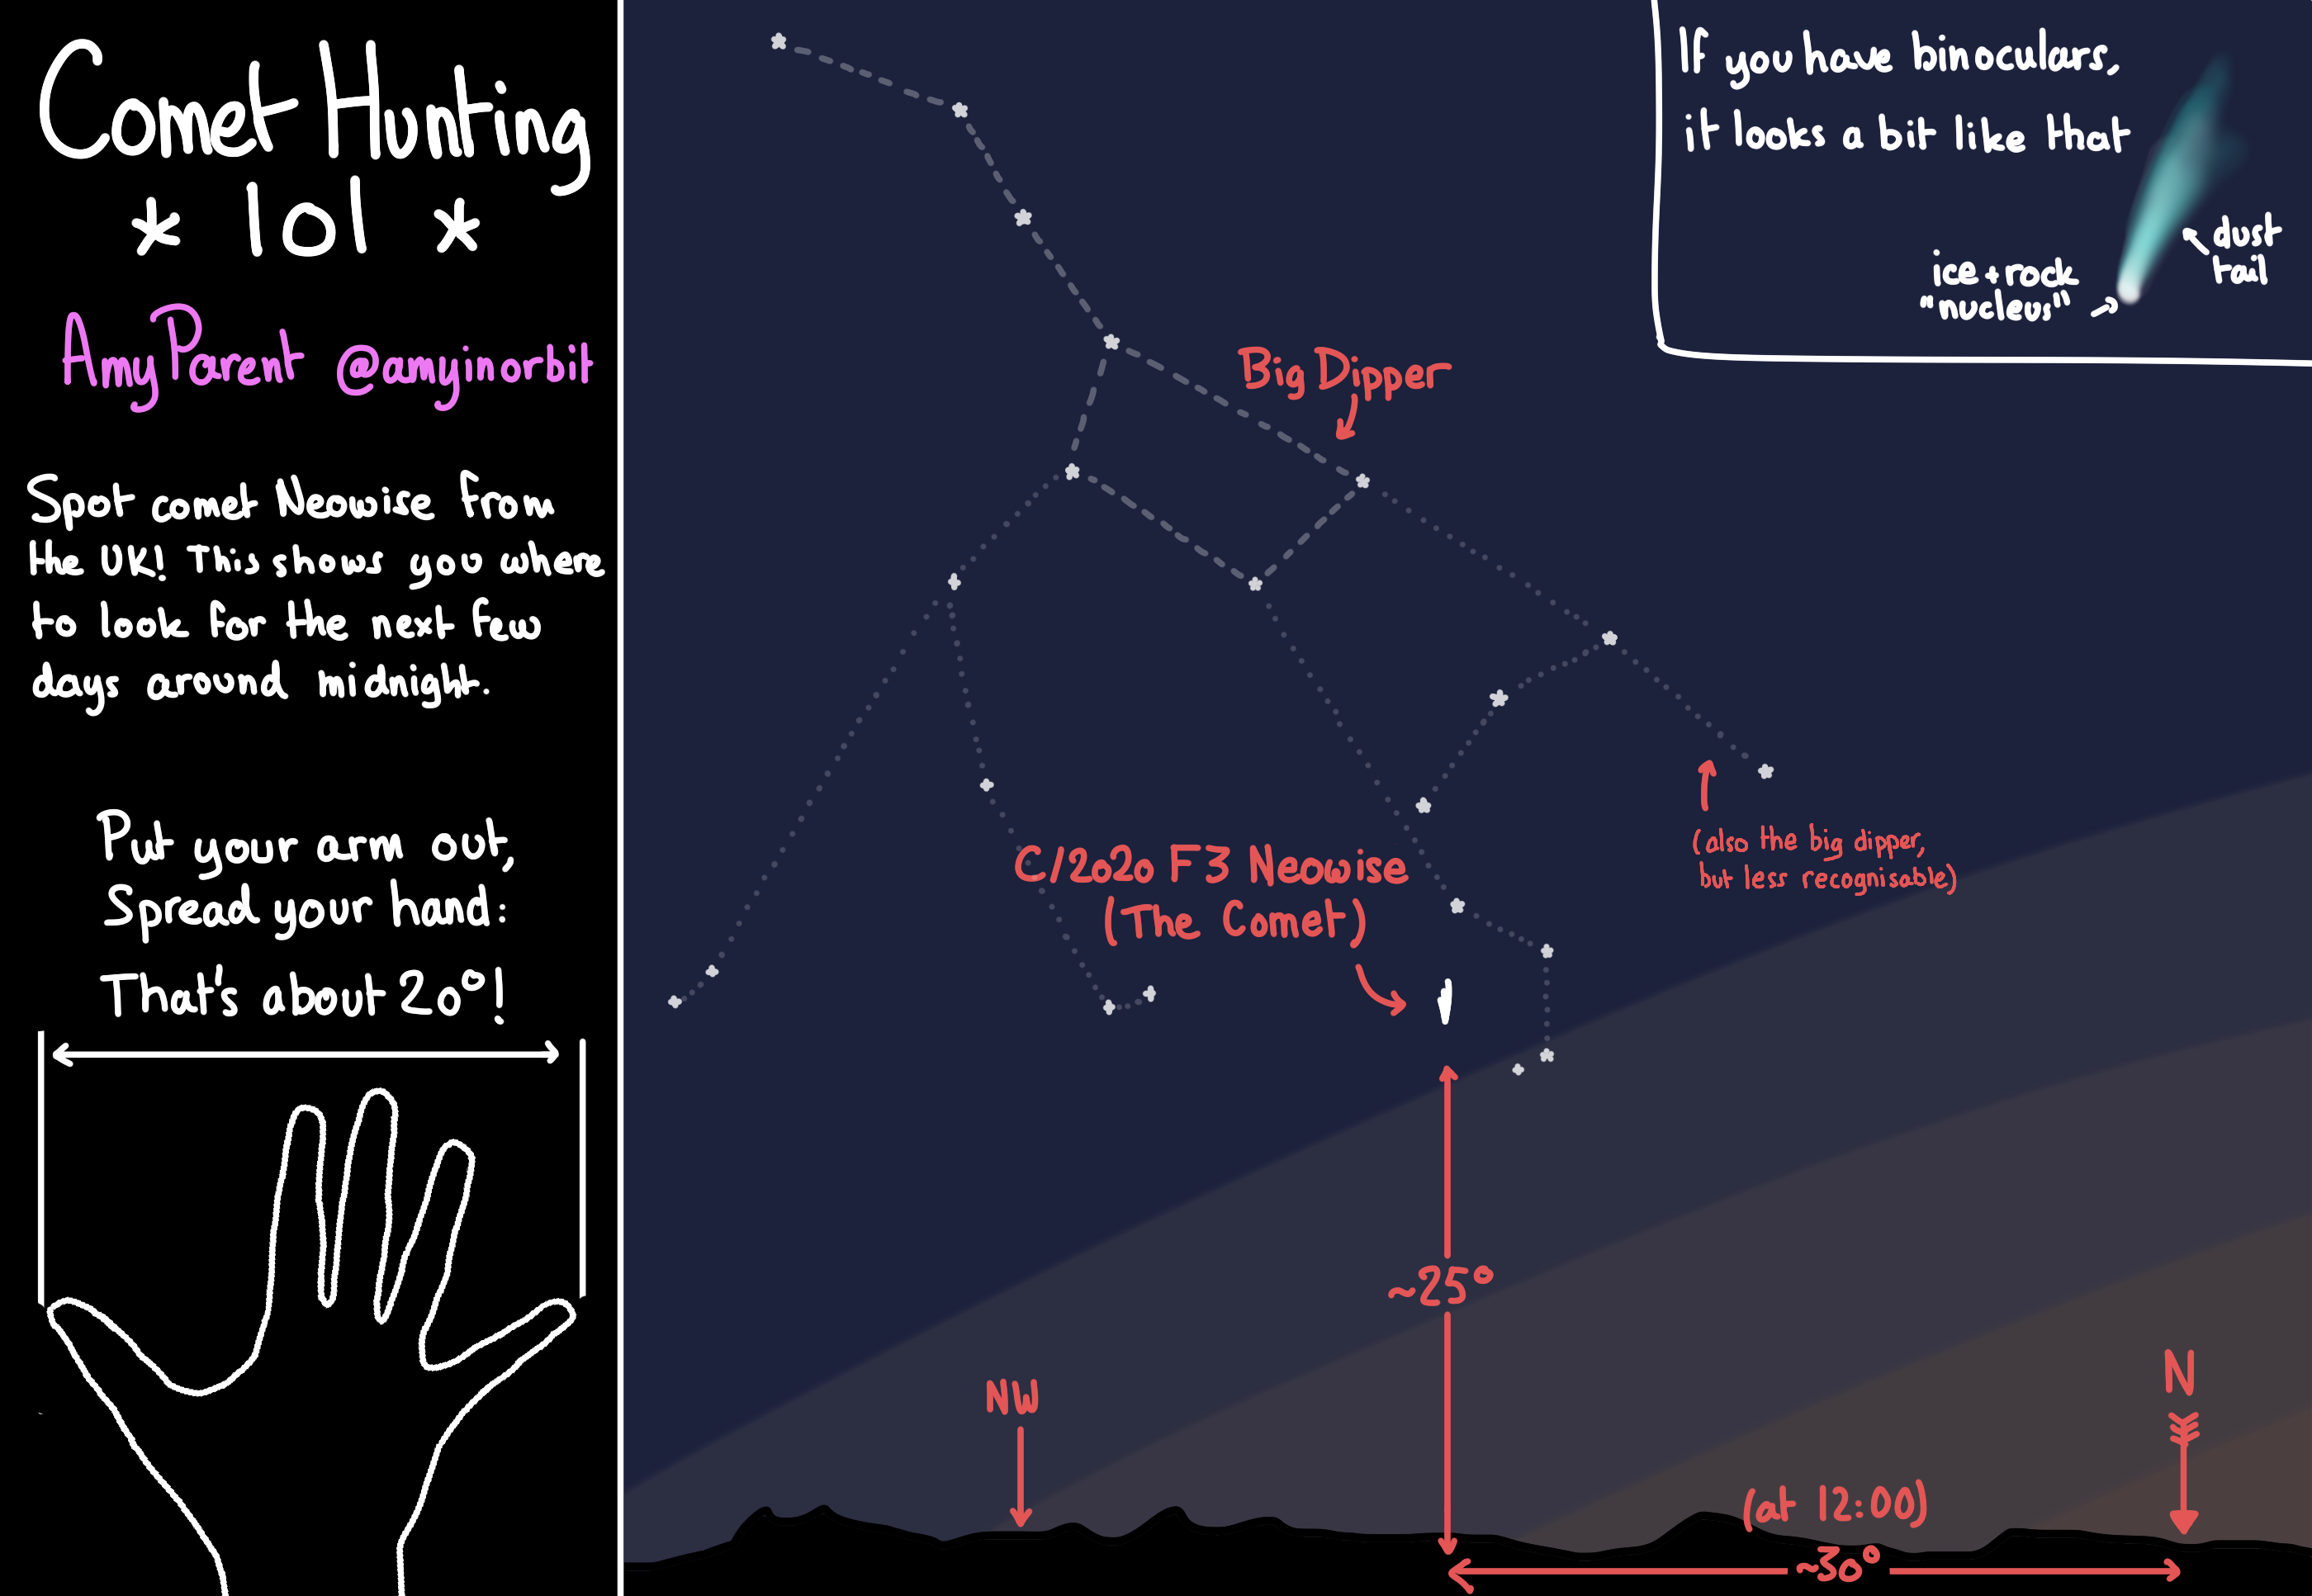 How to spot NEOWISE